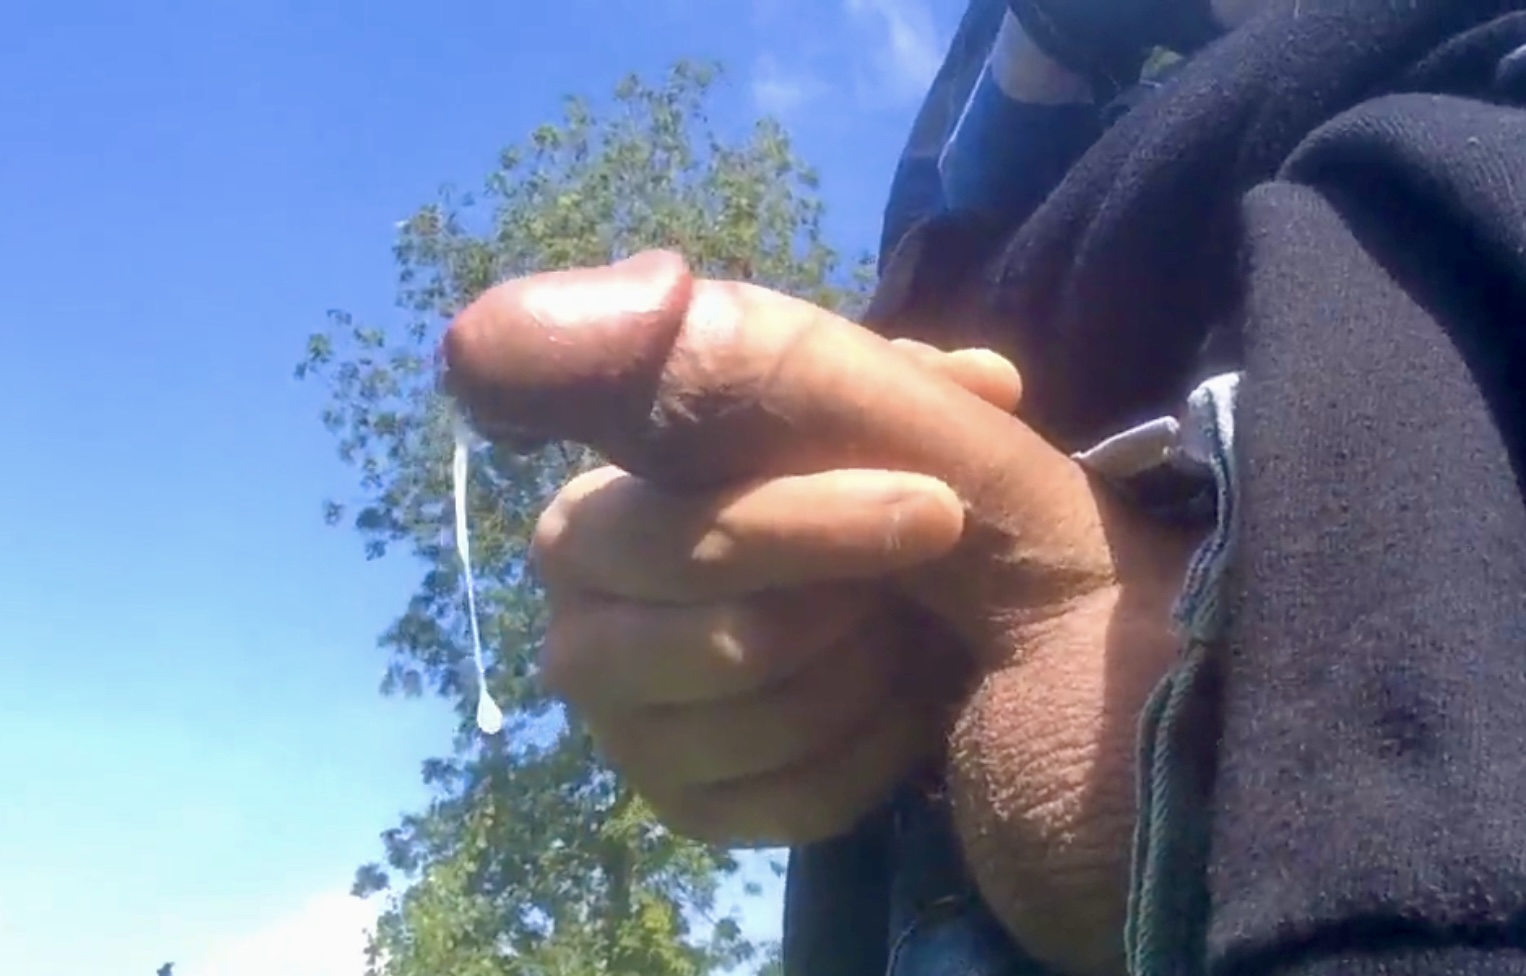 2021/2022 outdoor cumshots trying to flash my cock